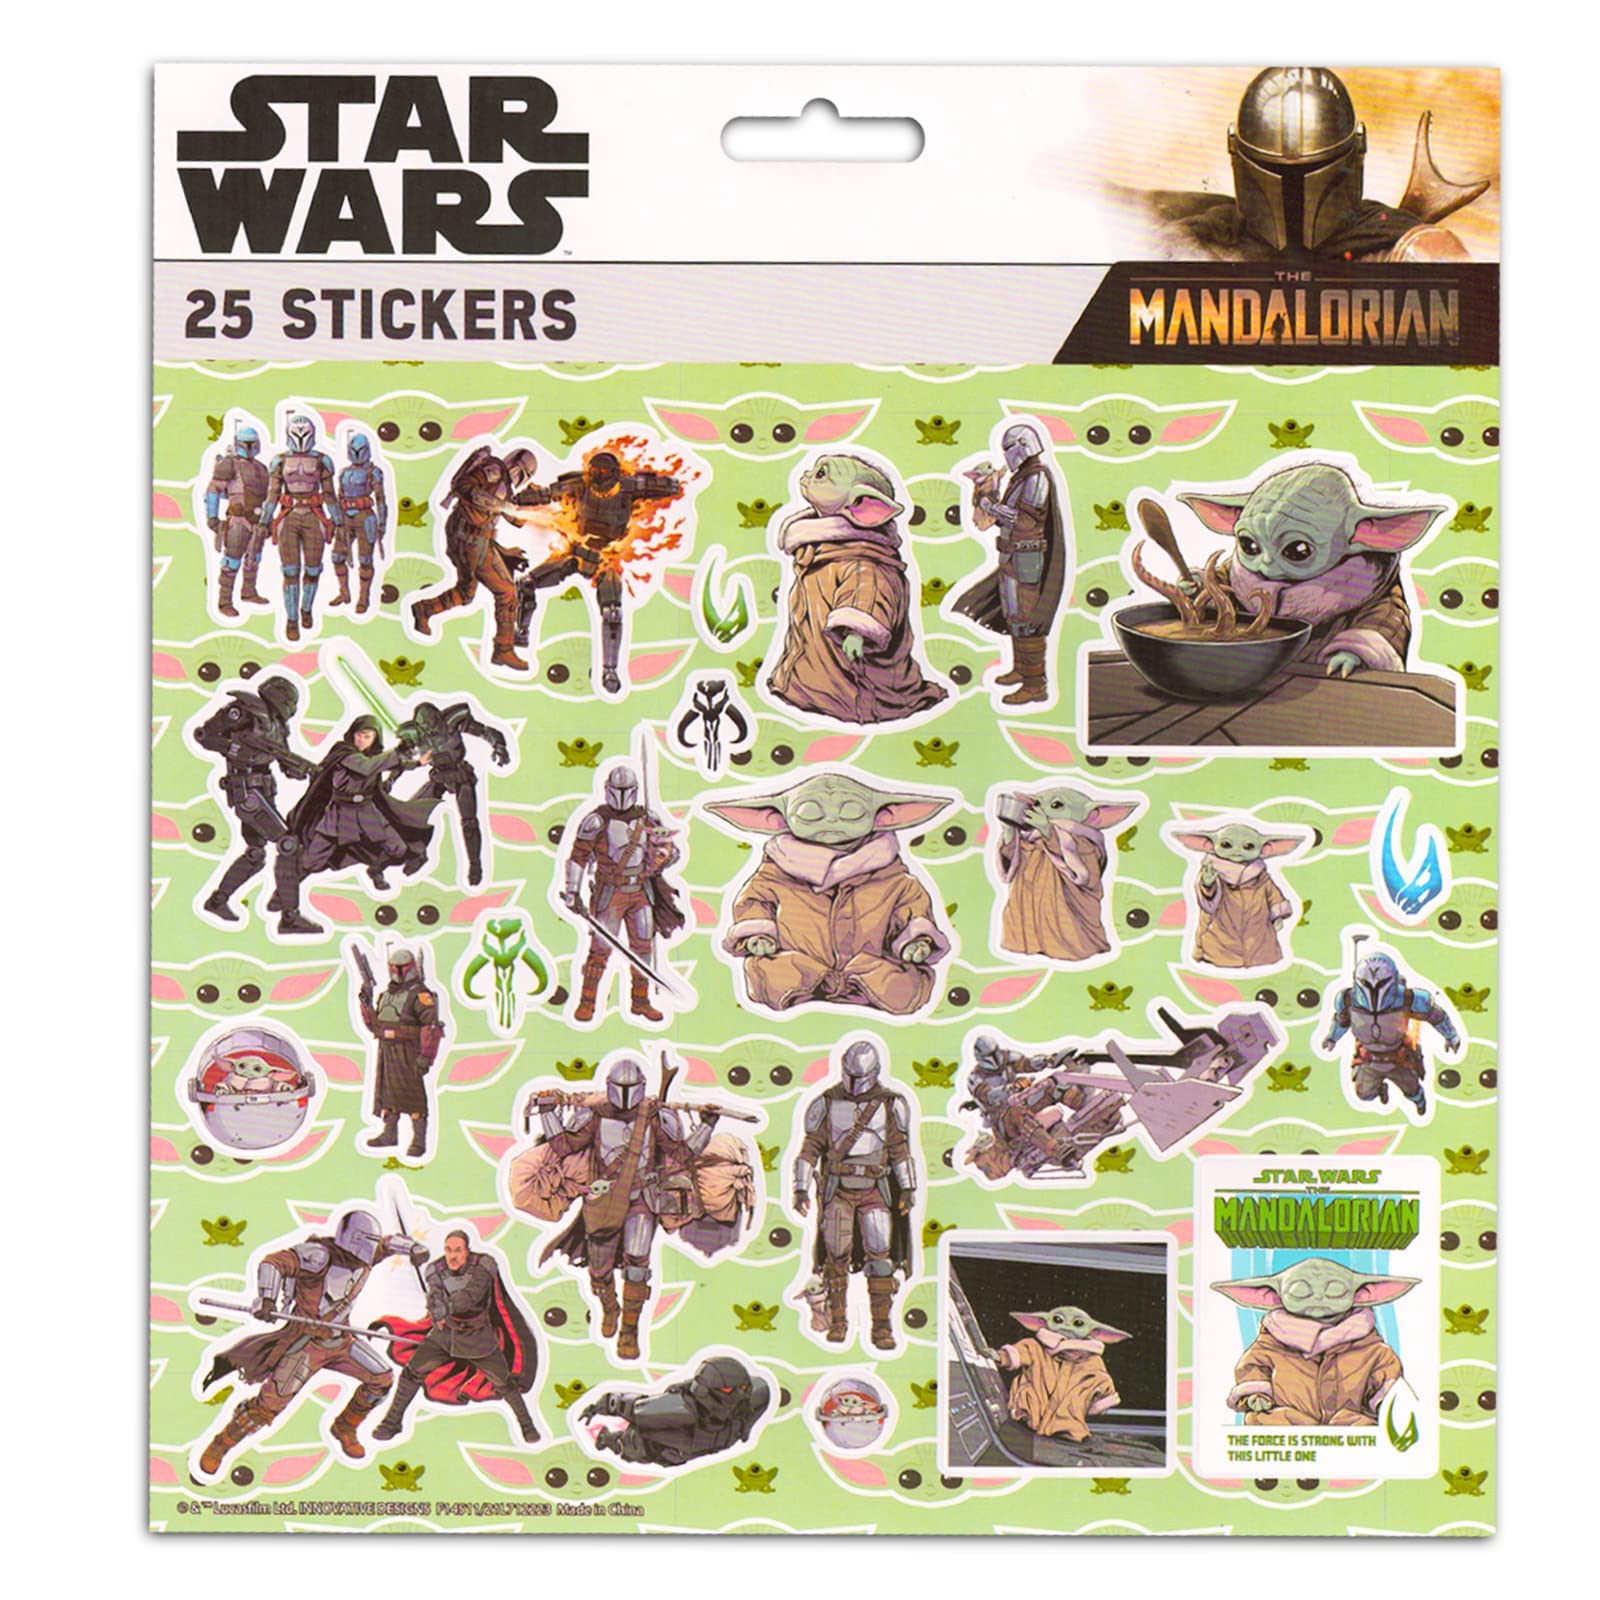 Star Wars Backpack for Boys, Kids - Bundle with 16" Baby Yoda School Backpack, Star Wars Stickers, and More | Mandalorian School Supplies